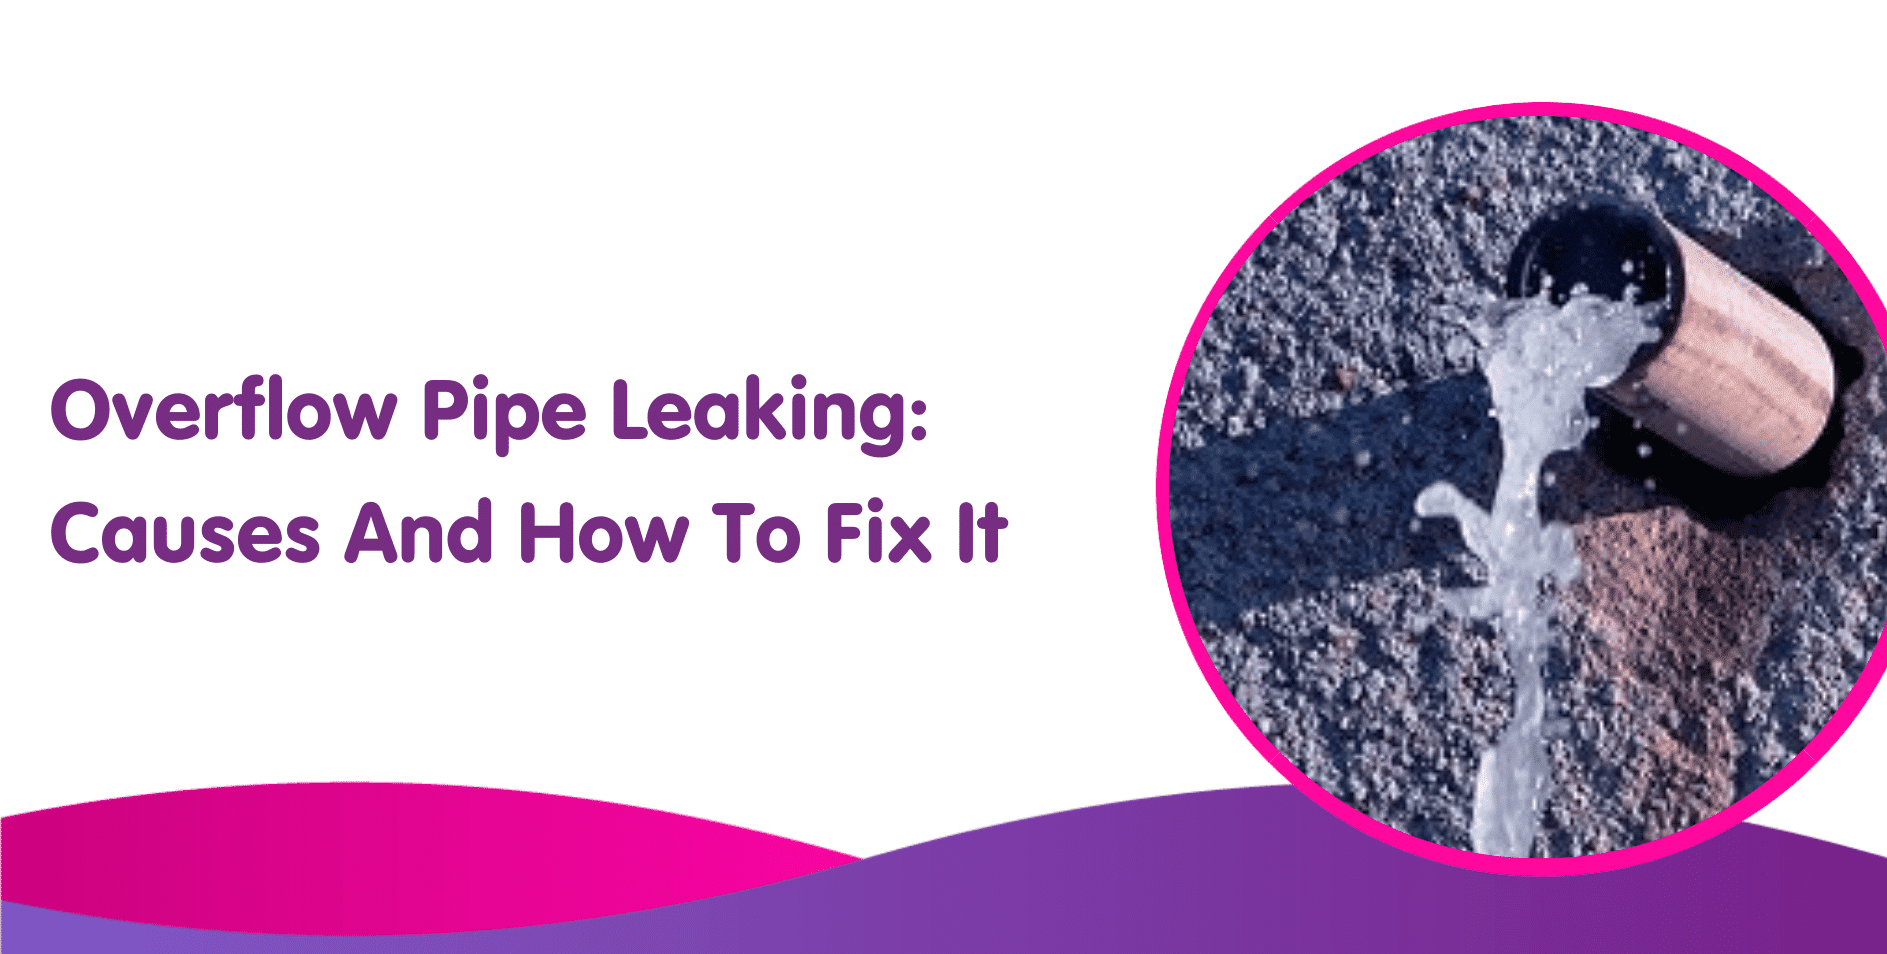 Overflow Pipe Leaking: Causes And How To Fix It